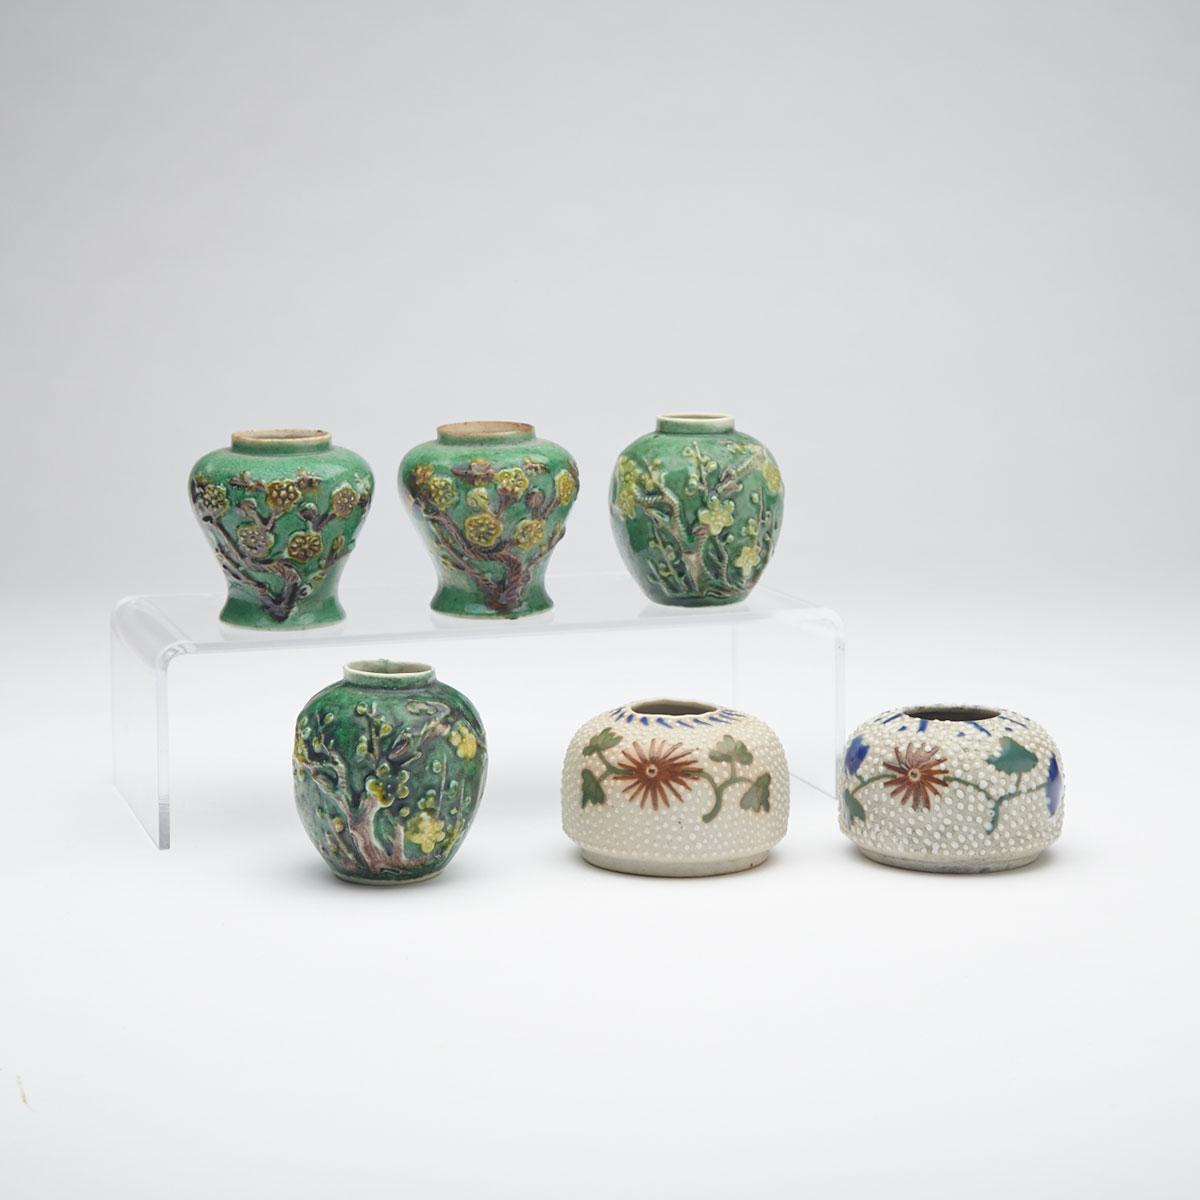 Six Miniature Slip Decorated Biscuit Fired Jarlets, 19th/20th Century